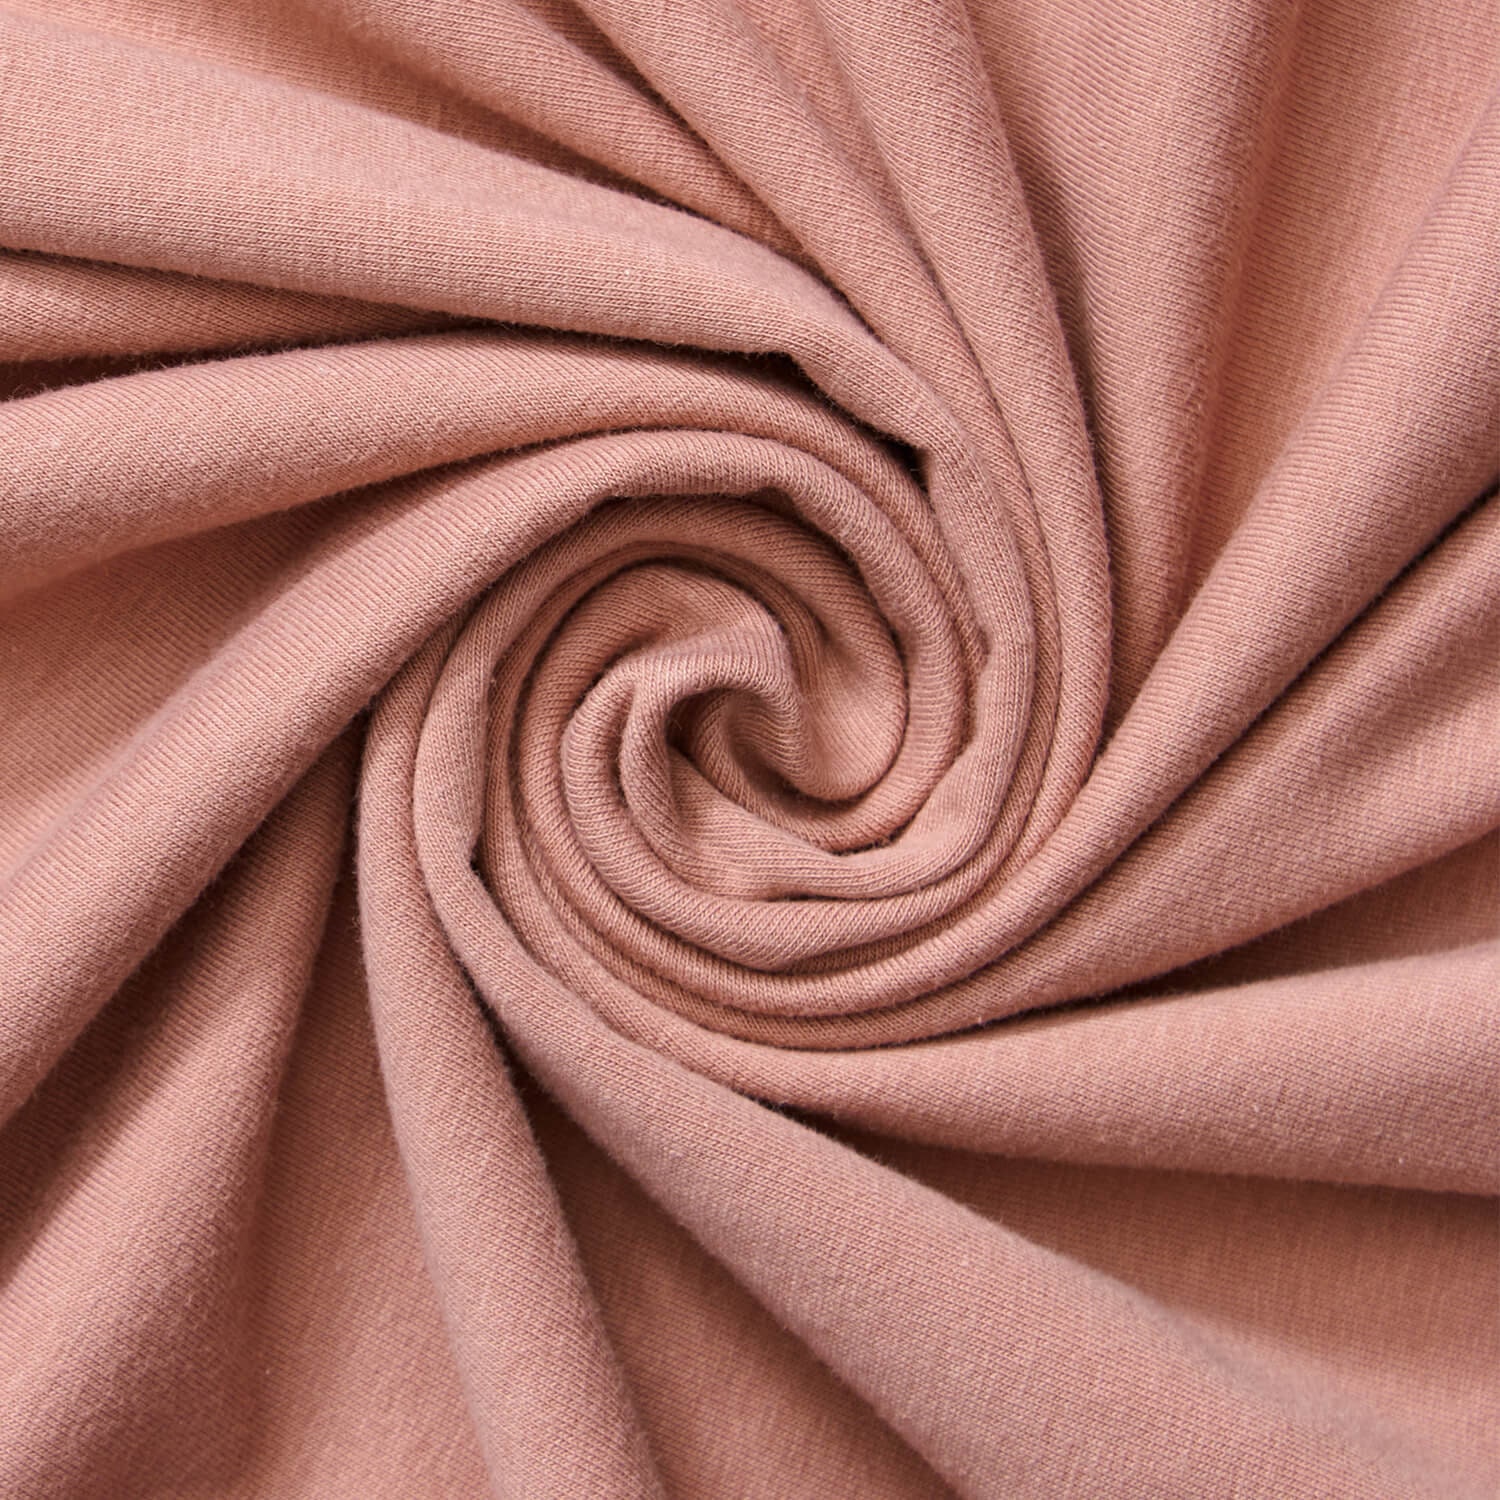 Oatmeal Cotton Jersey Knit Fabric by the Yard 200GSM 